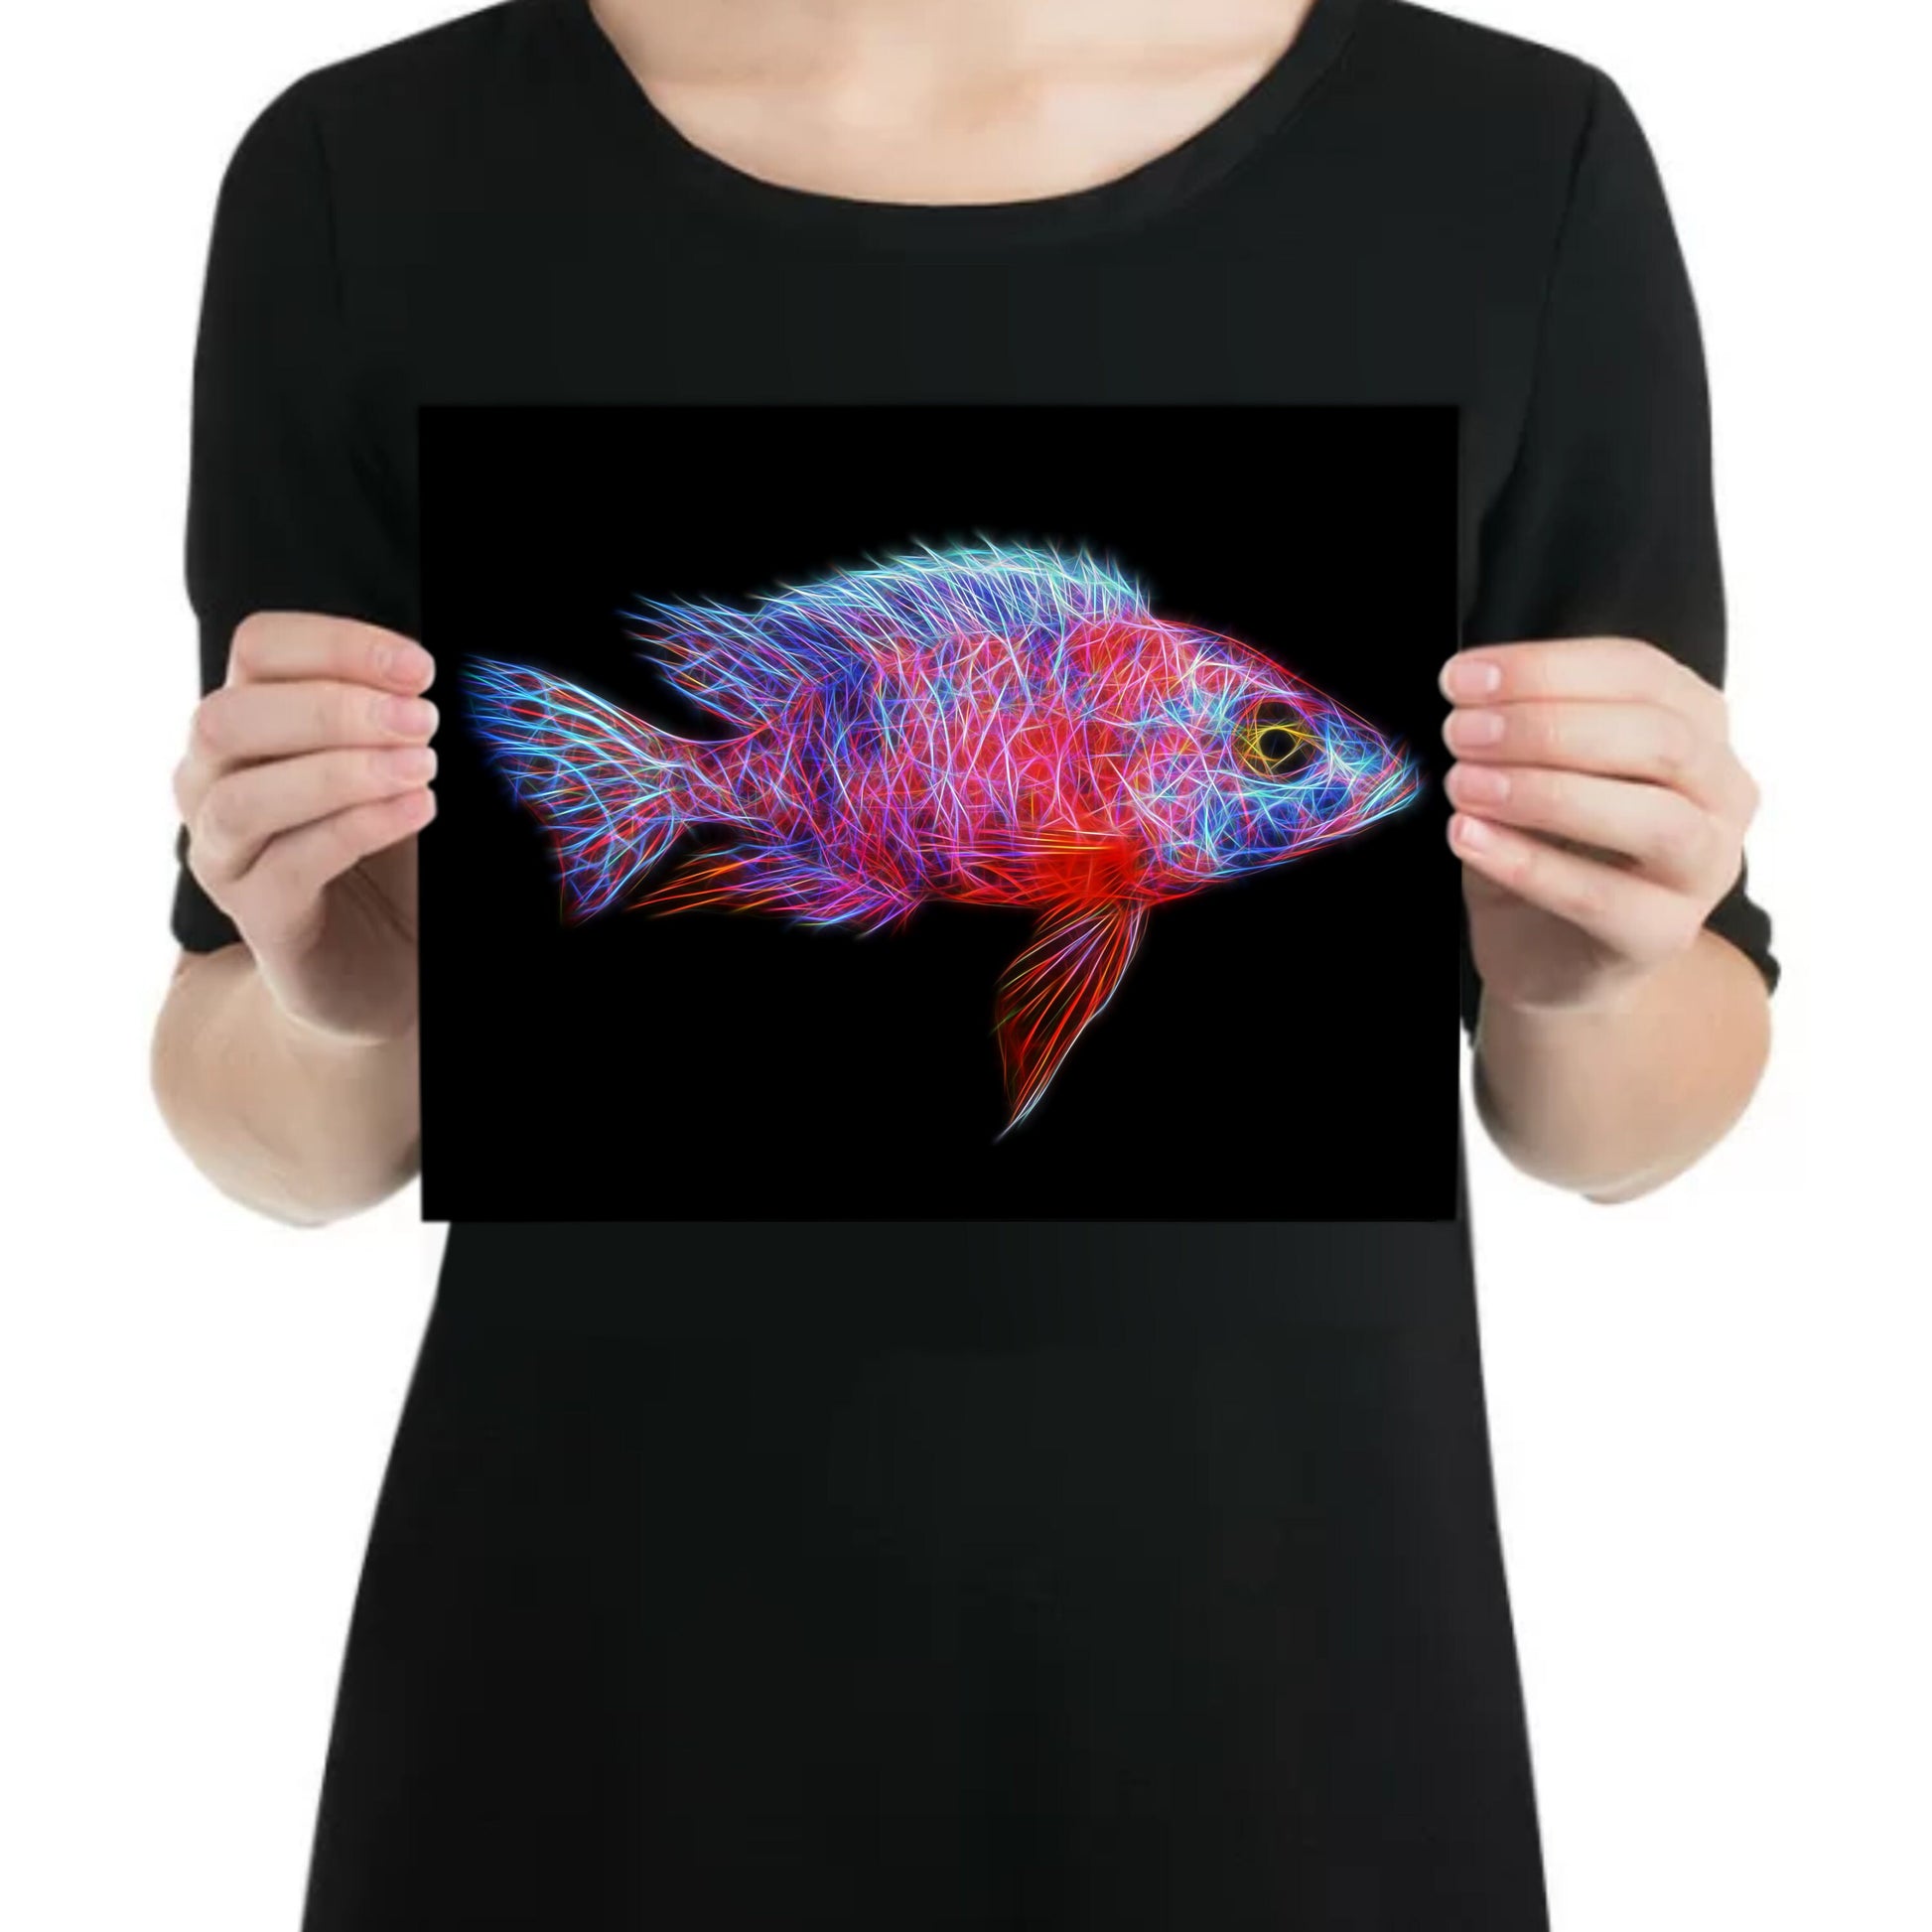 Red OB Peacock Cichlid Metal Wall Plaque with Stunning Fractal Art Design. Aulonocara Sp